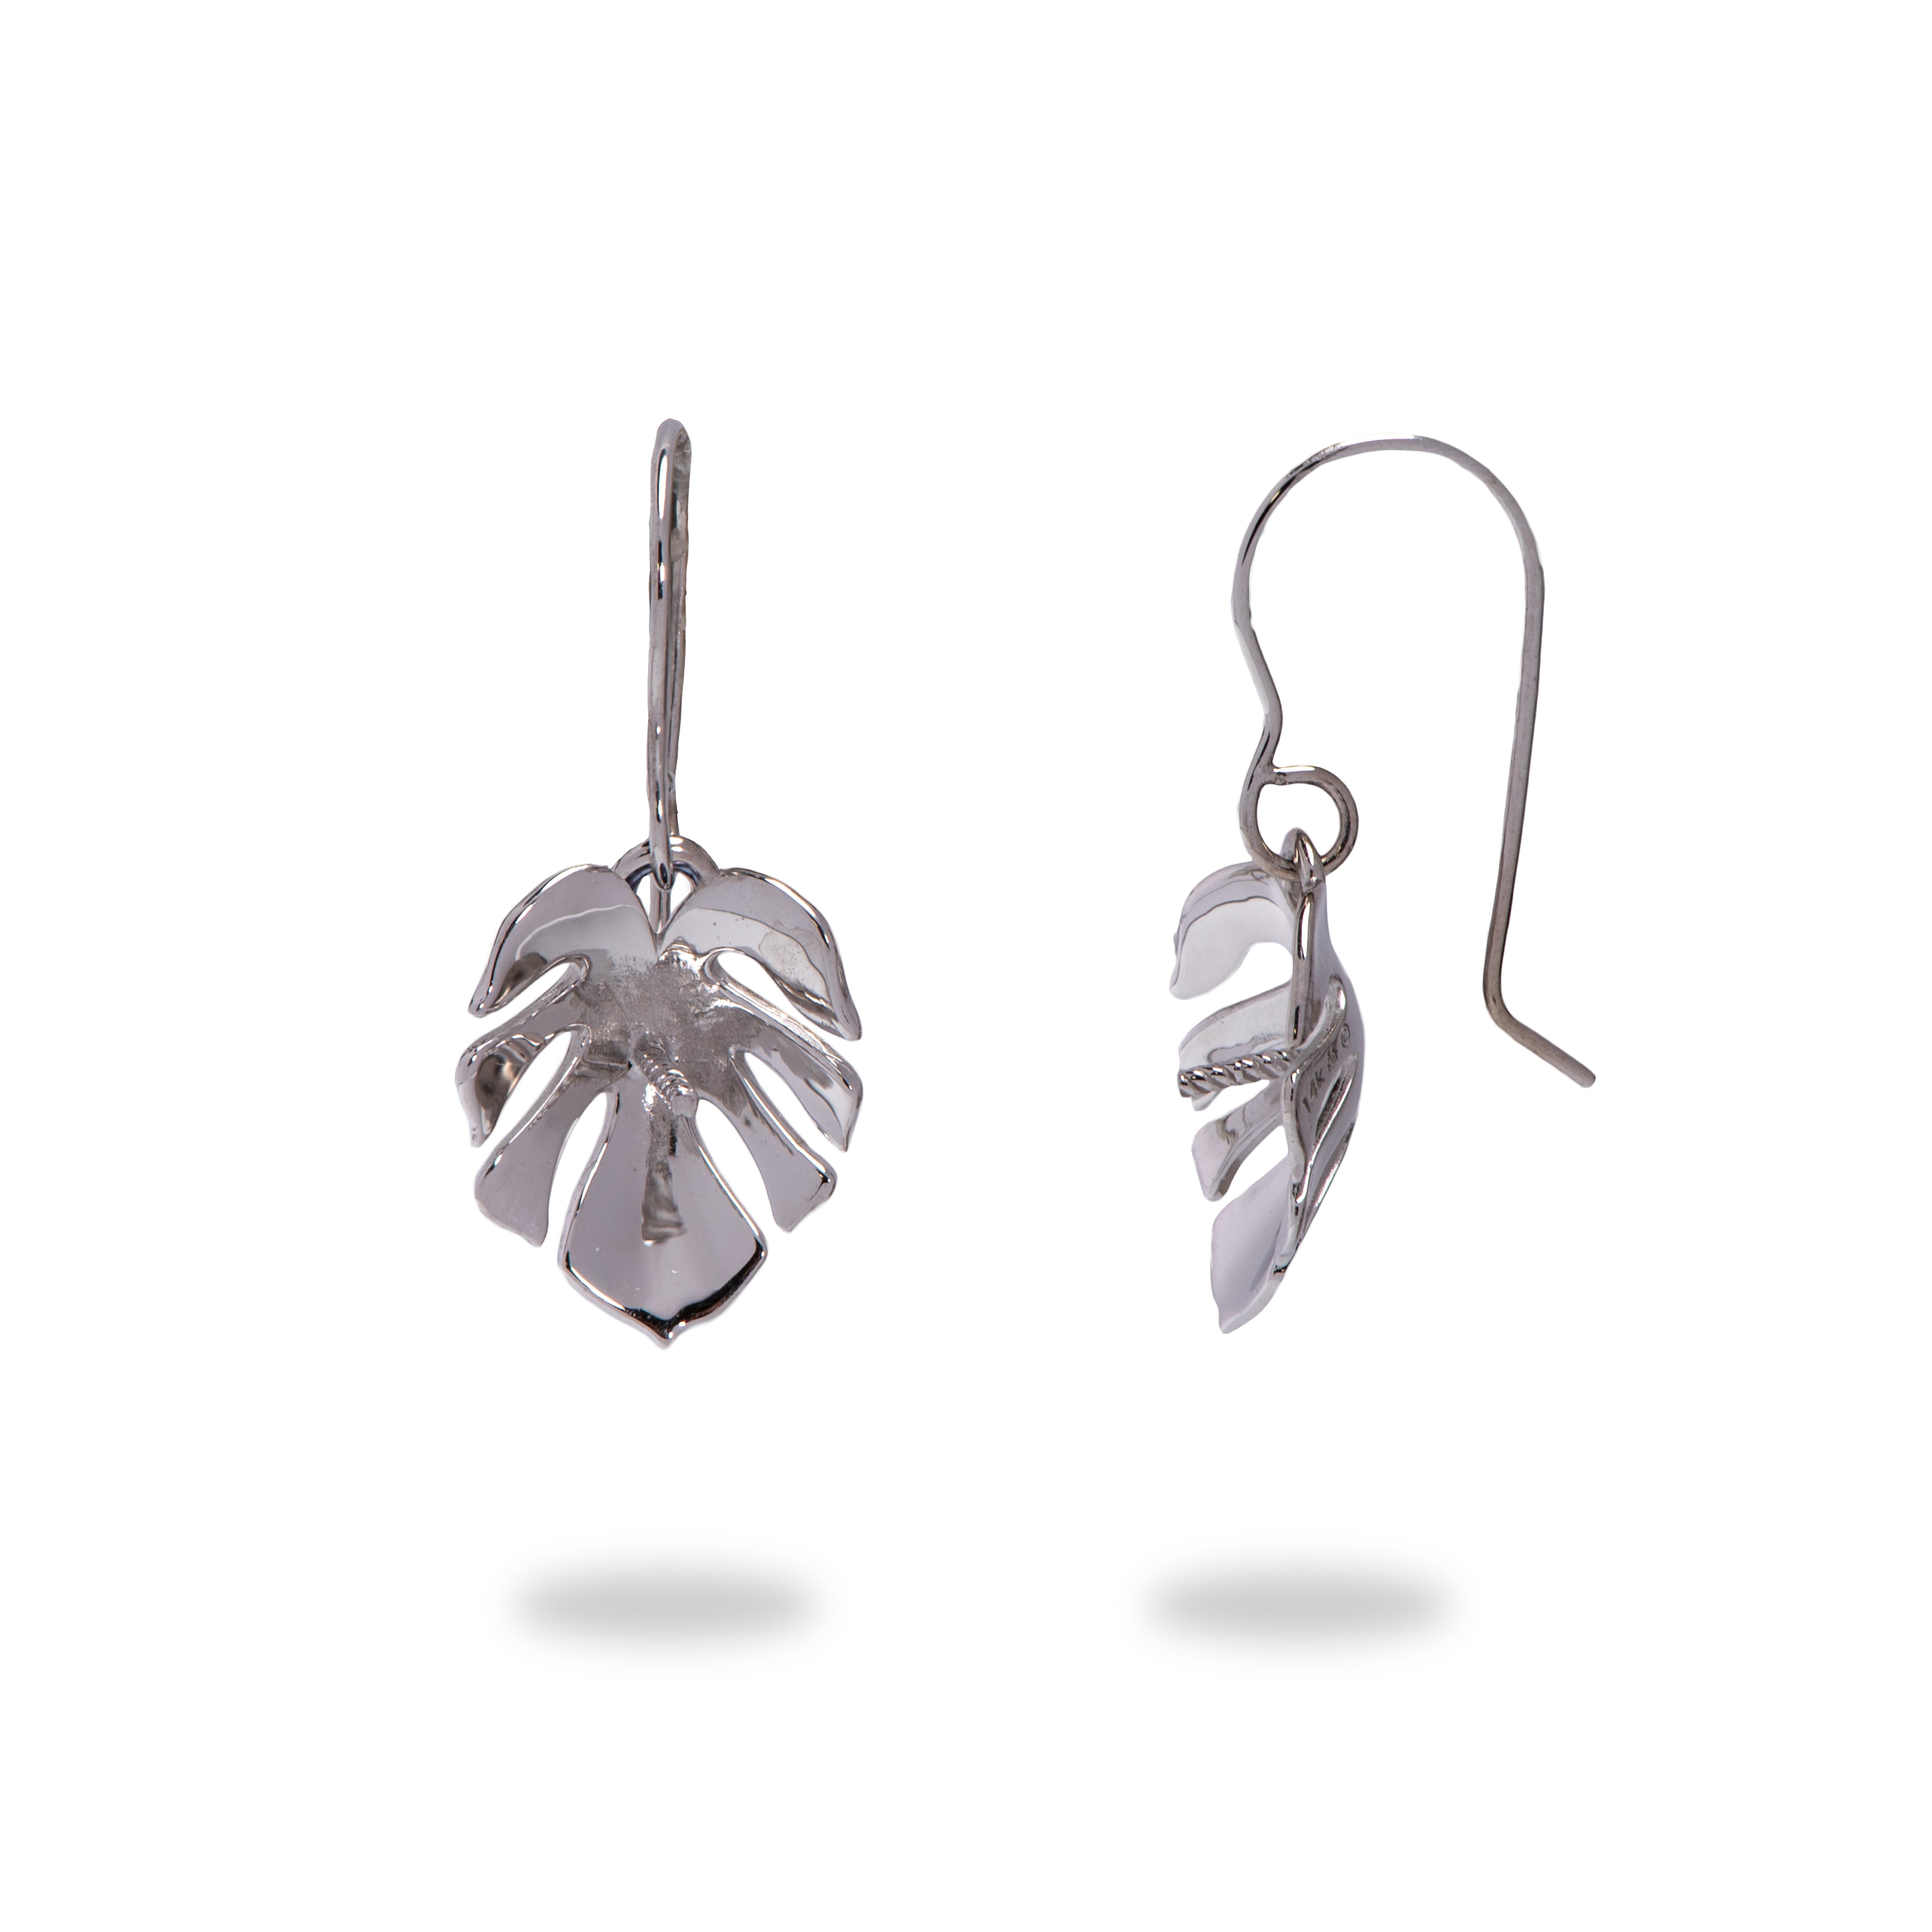 Pick-a-Pearl Monstera Earrings in White Gold - 15mm - Maui Divers Jewelry